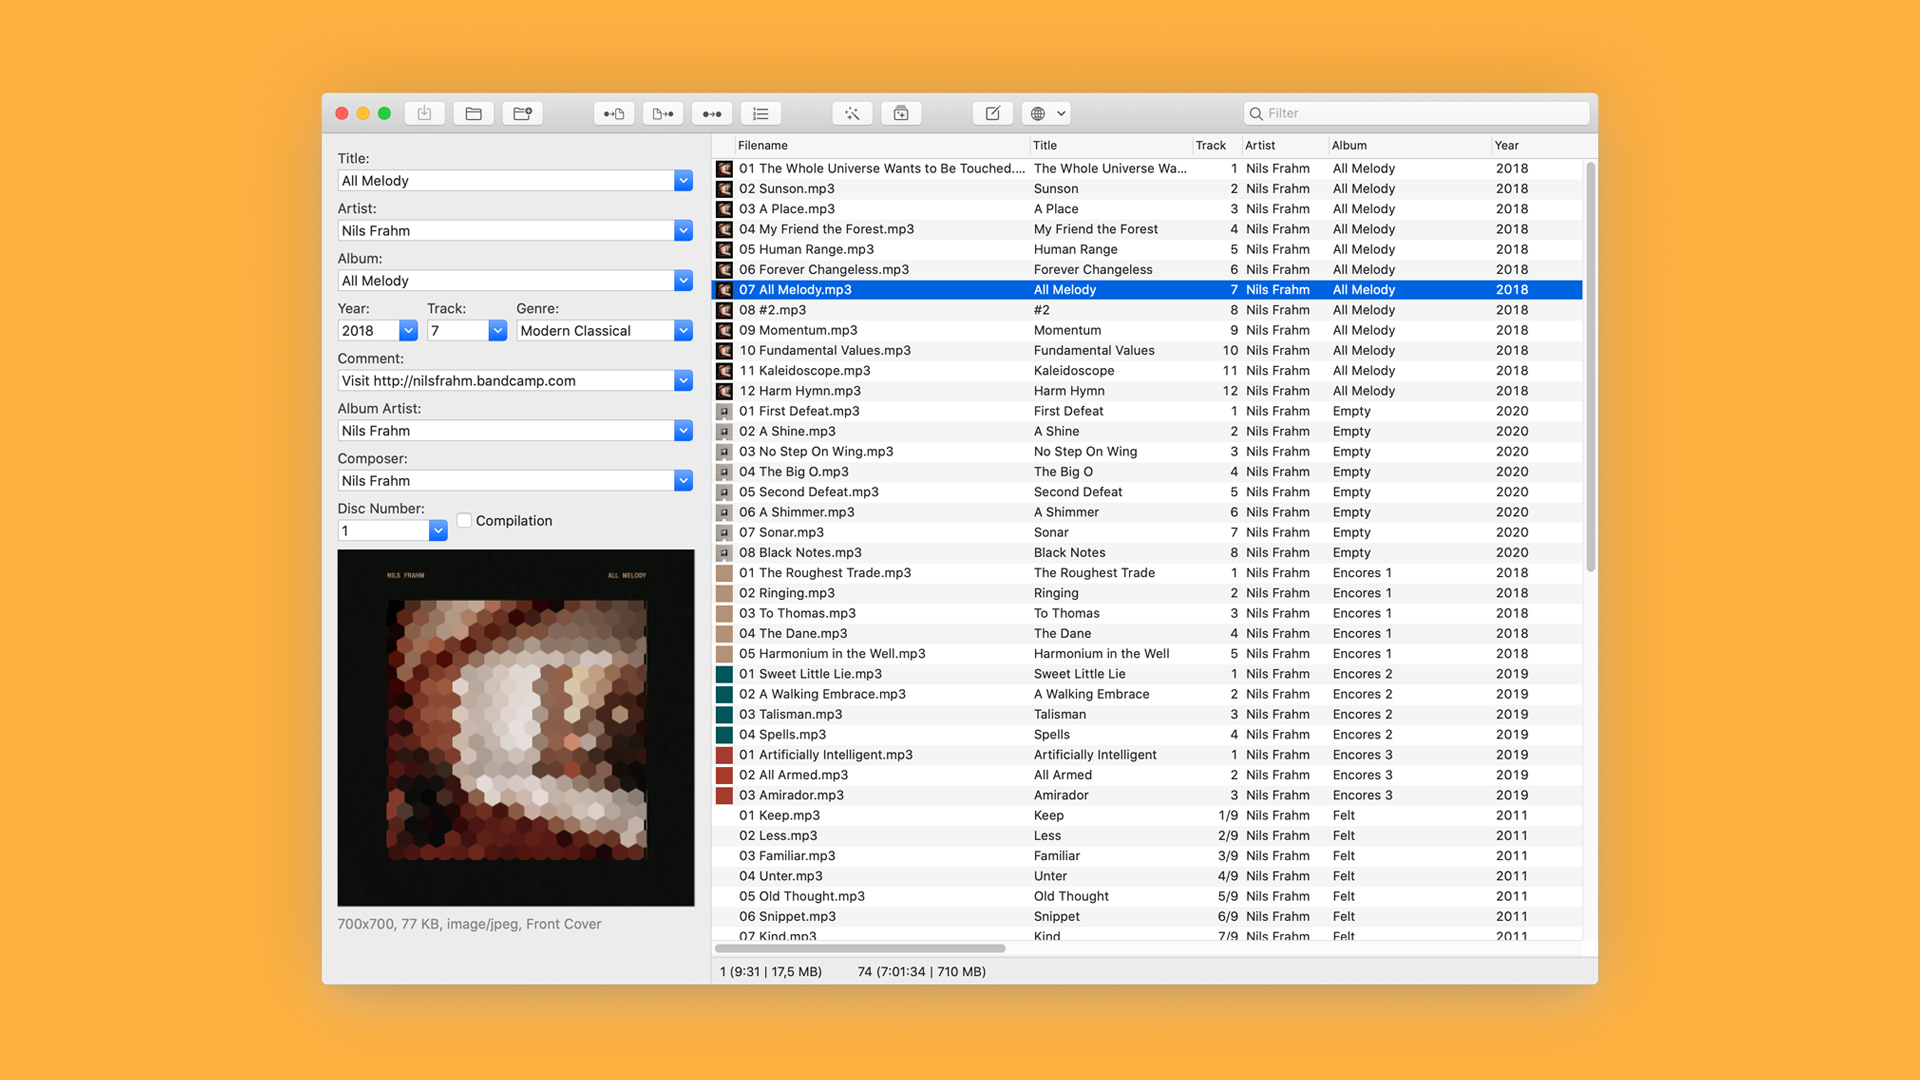 for mac download Mp3tag 3.22a